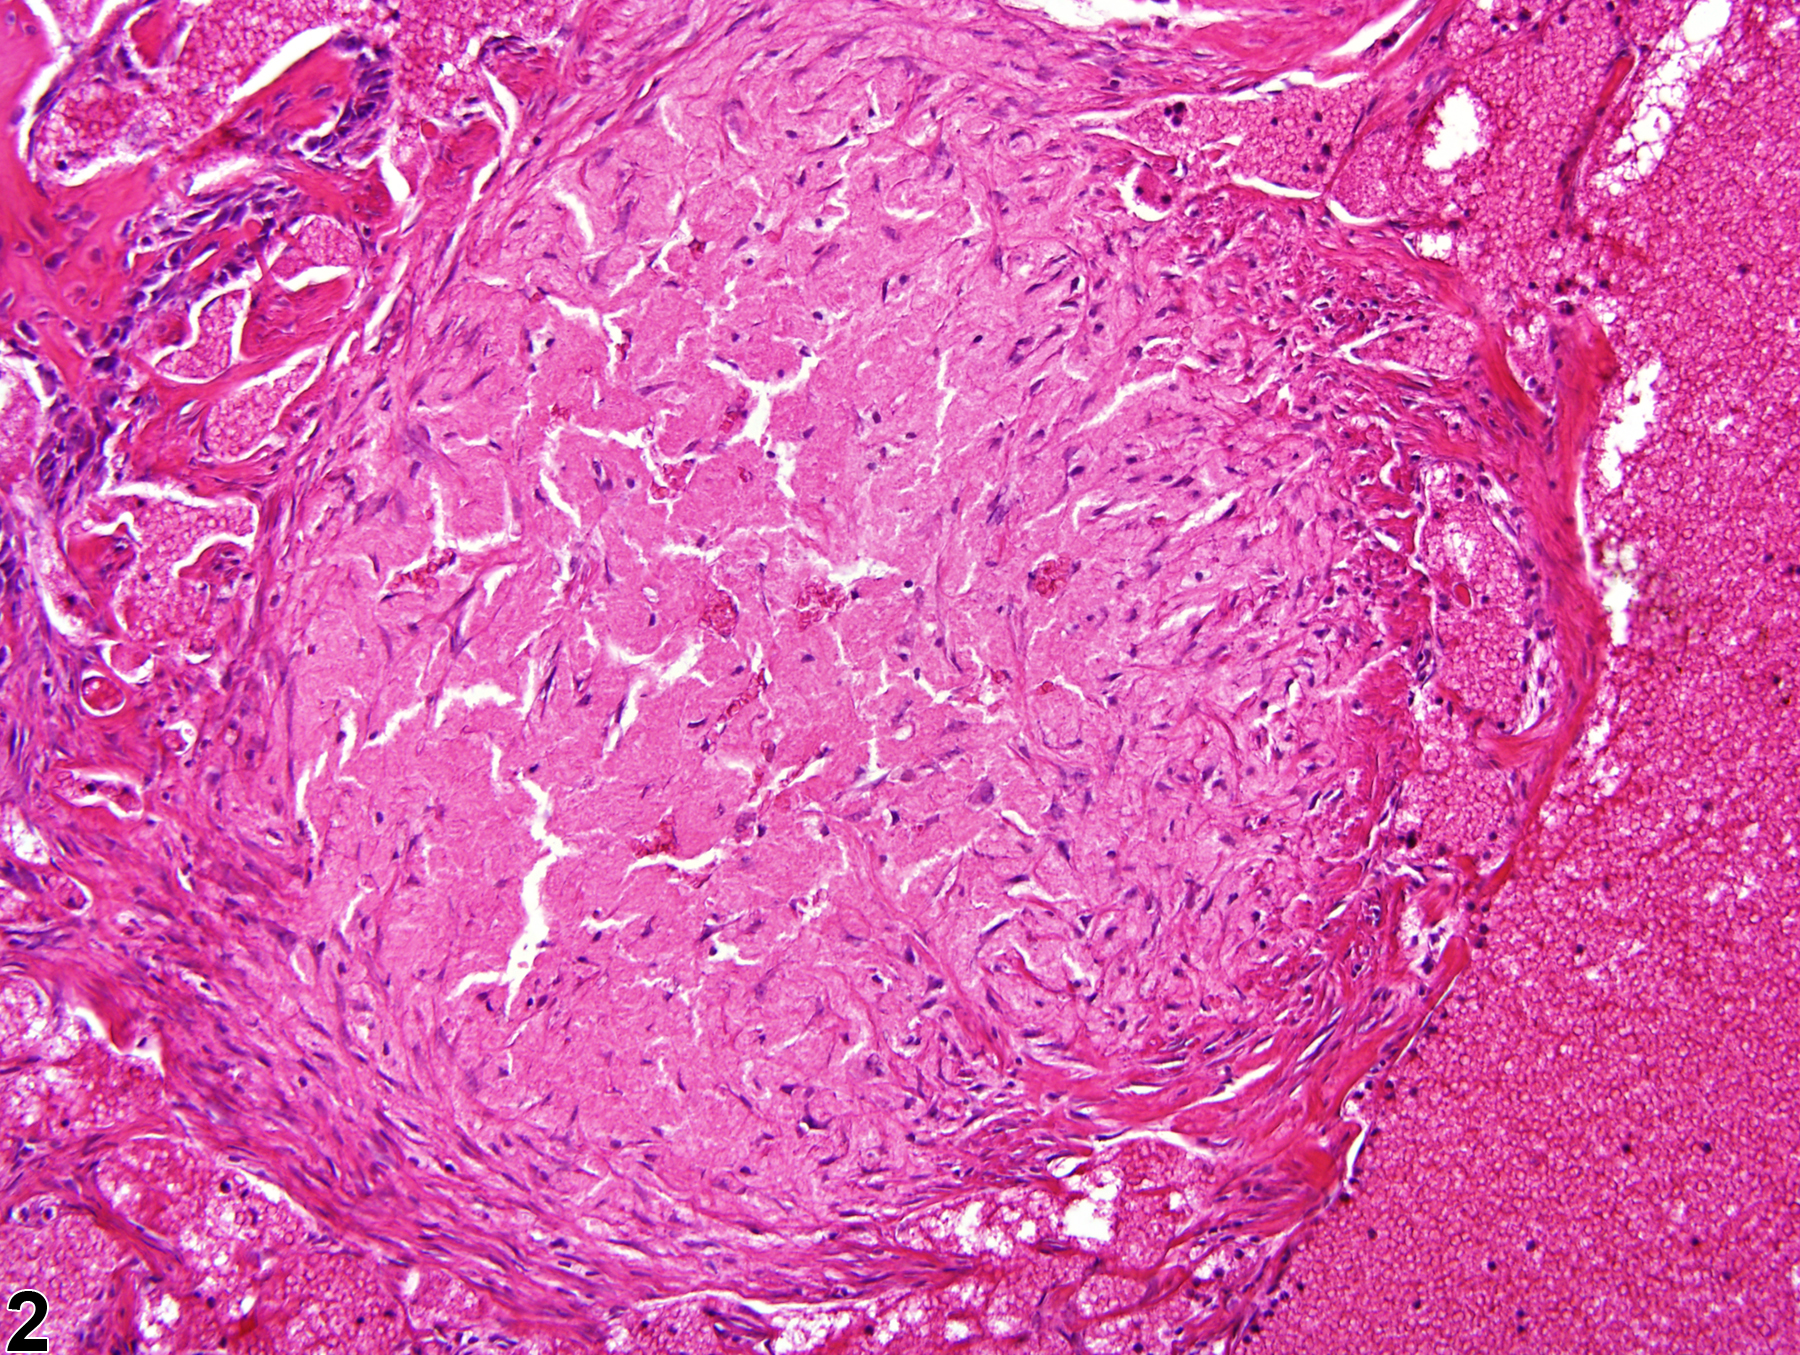 Image of fibrosis in the bone marrow from a male F344/N rat in a chronic study